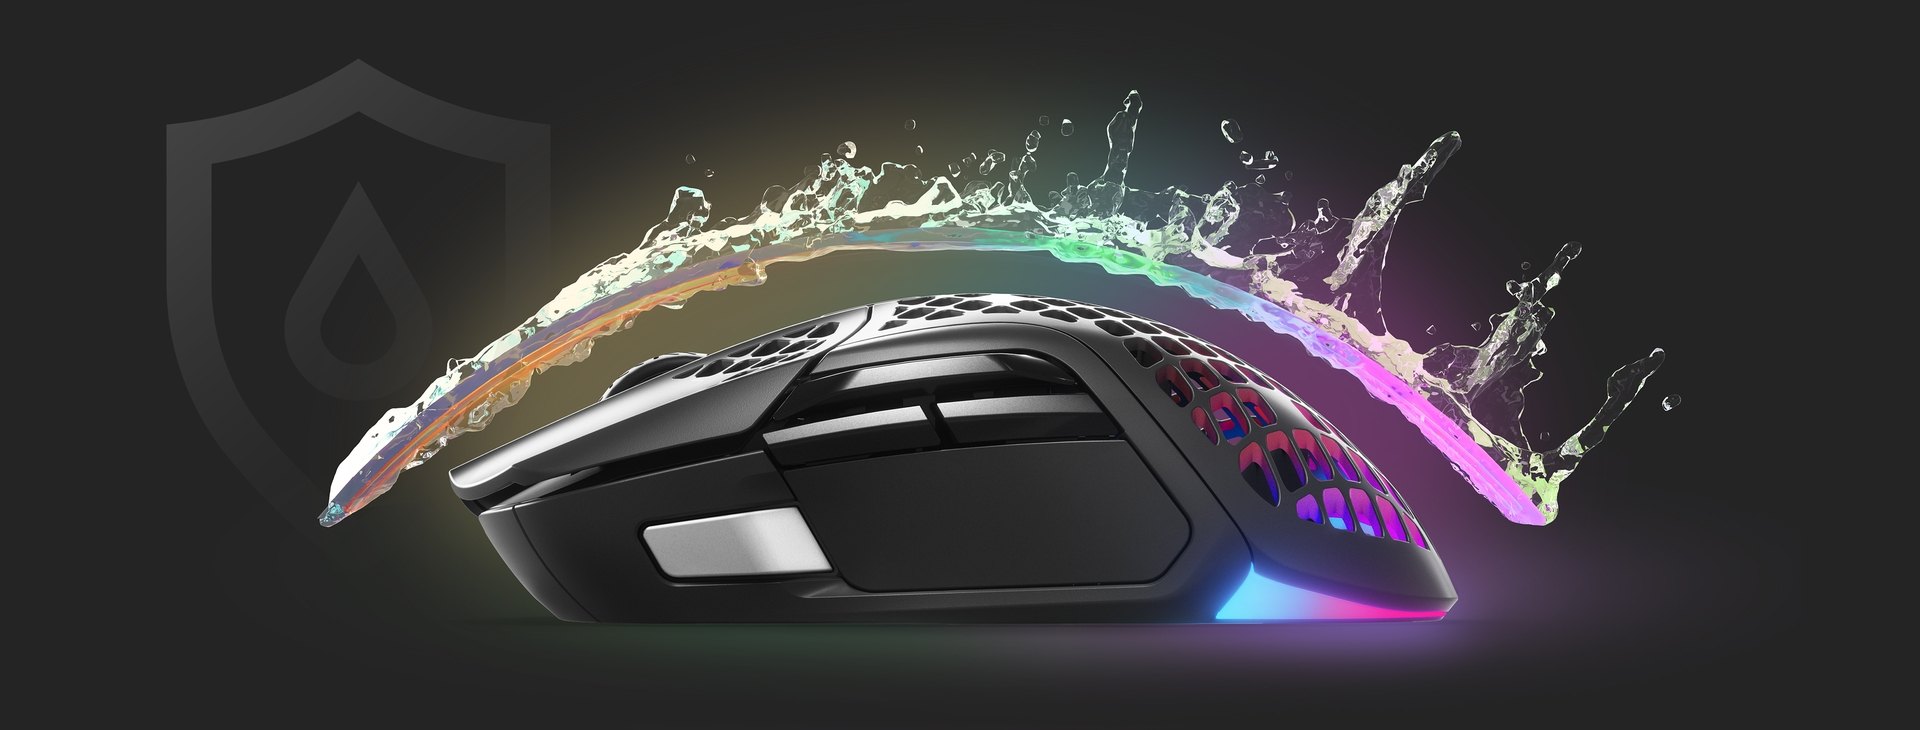 An Aerox 5 Wireless mouse with an invisible shield protecting it from incoming water splashing, to convey the waterproofing features.